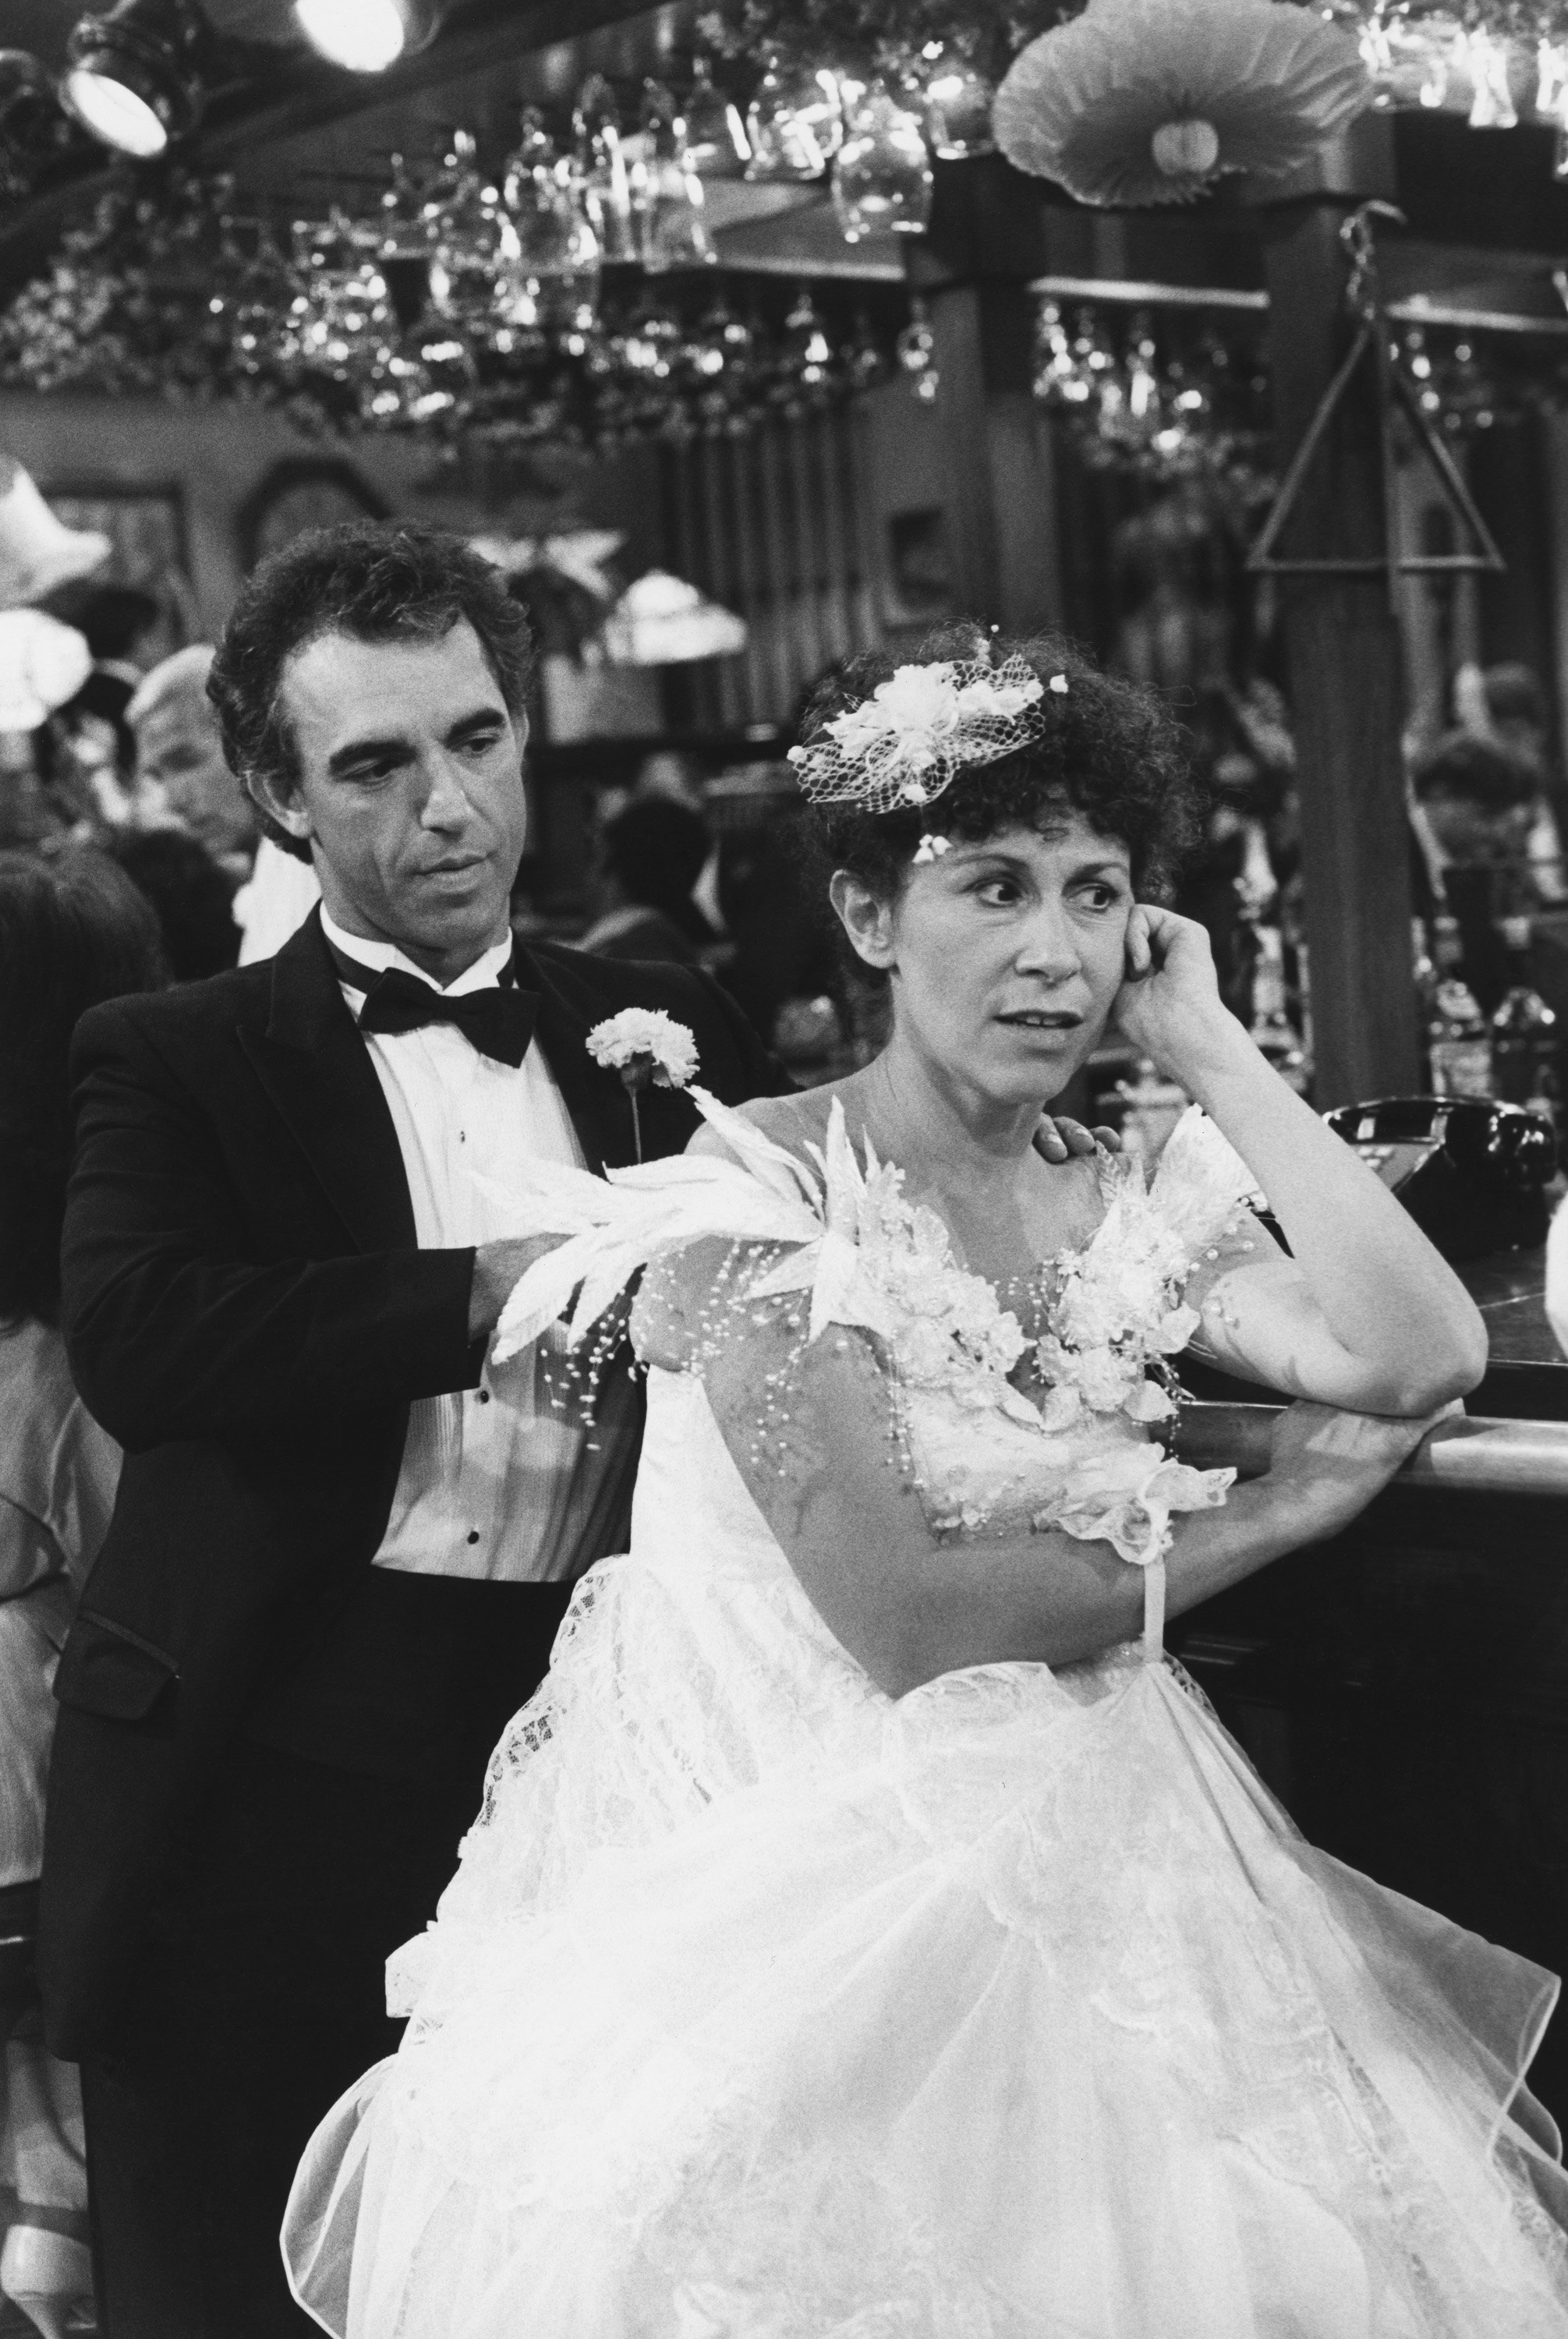 Still of Rhea Perlman and Jay Thomas in Cheers (1982)